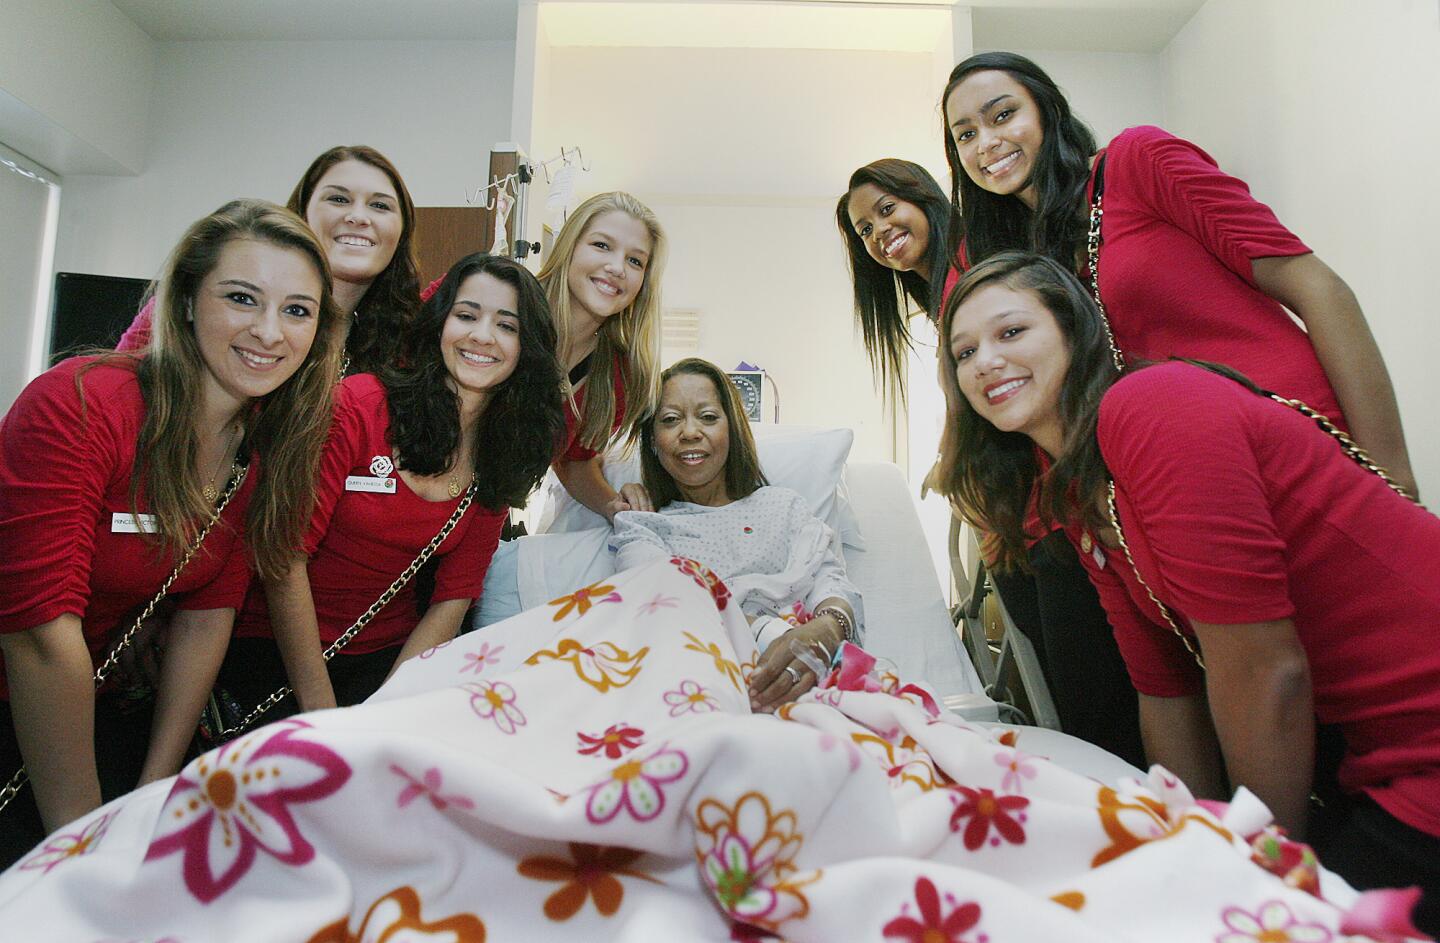 The 2013 Rose Court with patient Dana Thompson, of Glendale, at Glendale Adventist Medical Center in Glendale for the resumed annual visit by the Rose Court to visit staff and patients on Tuesday, November 13, 2012.